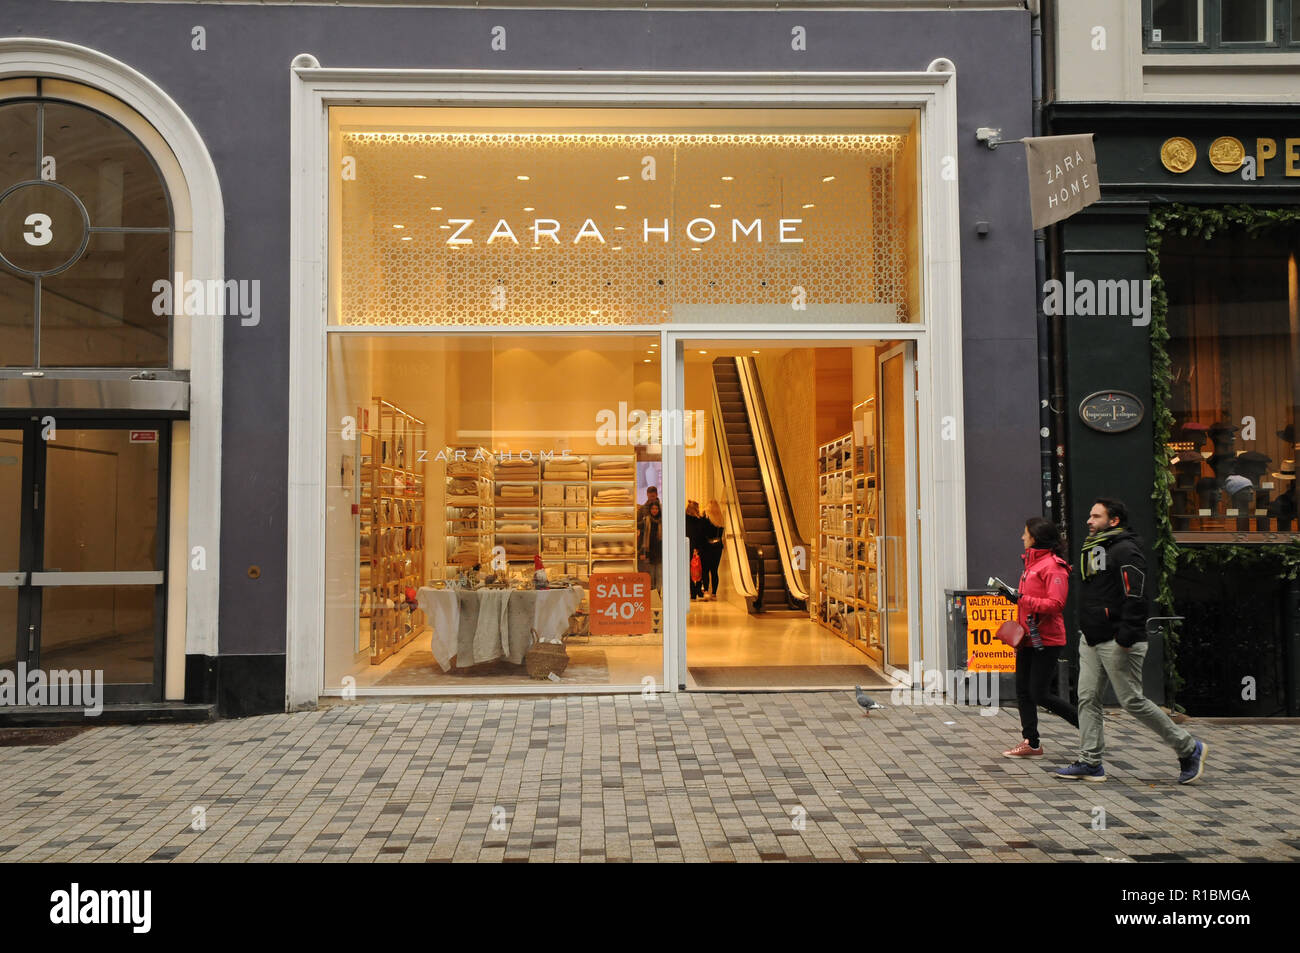 Page 4 - Zara Home Store High Resolution Stock Photography and Images -  Alamy